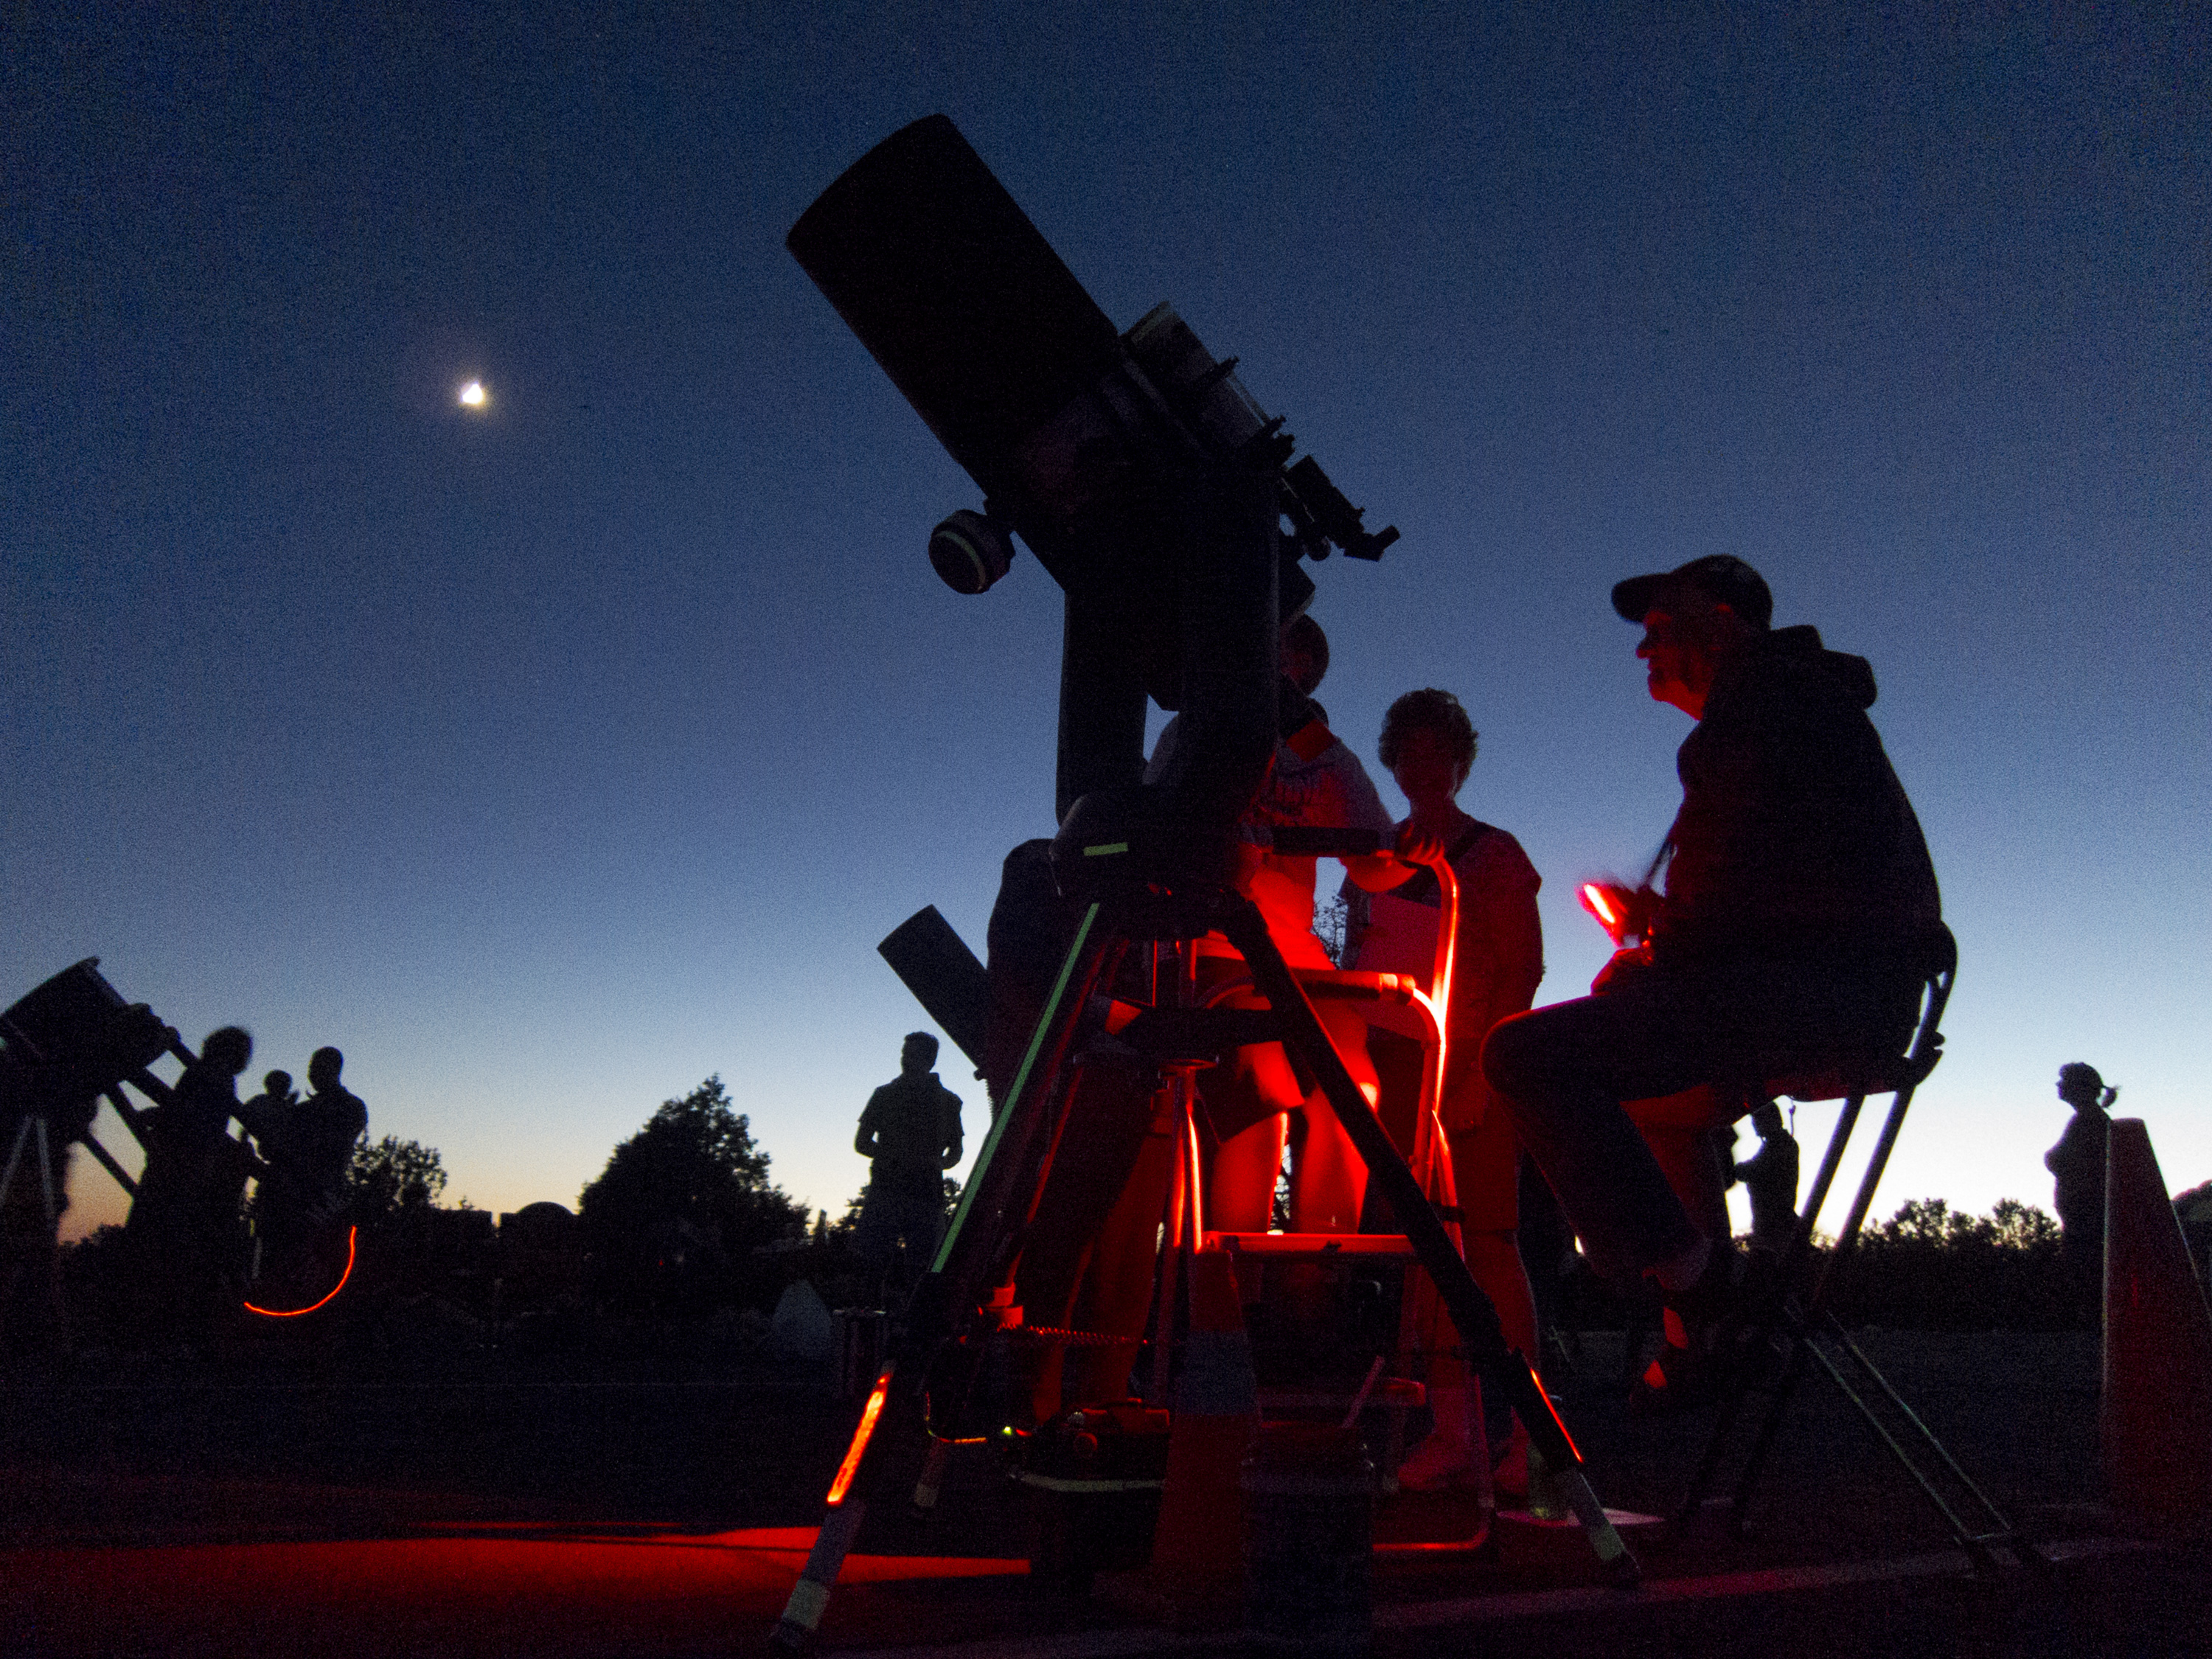 Grand Canyon Star Party to return with on-site event featuring speakers, free telescope viewing